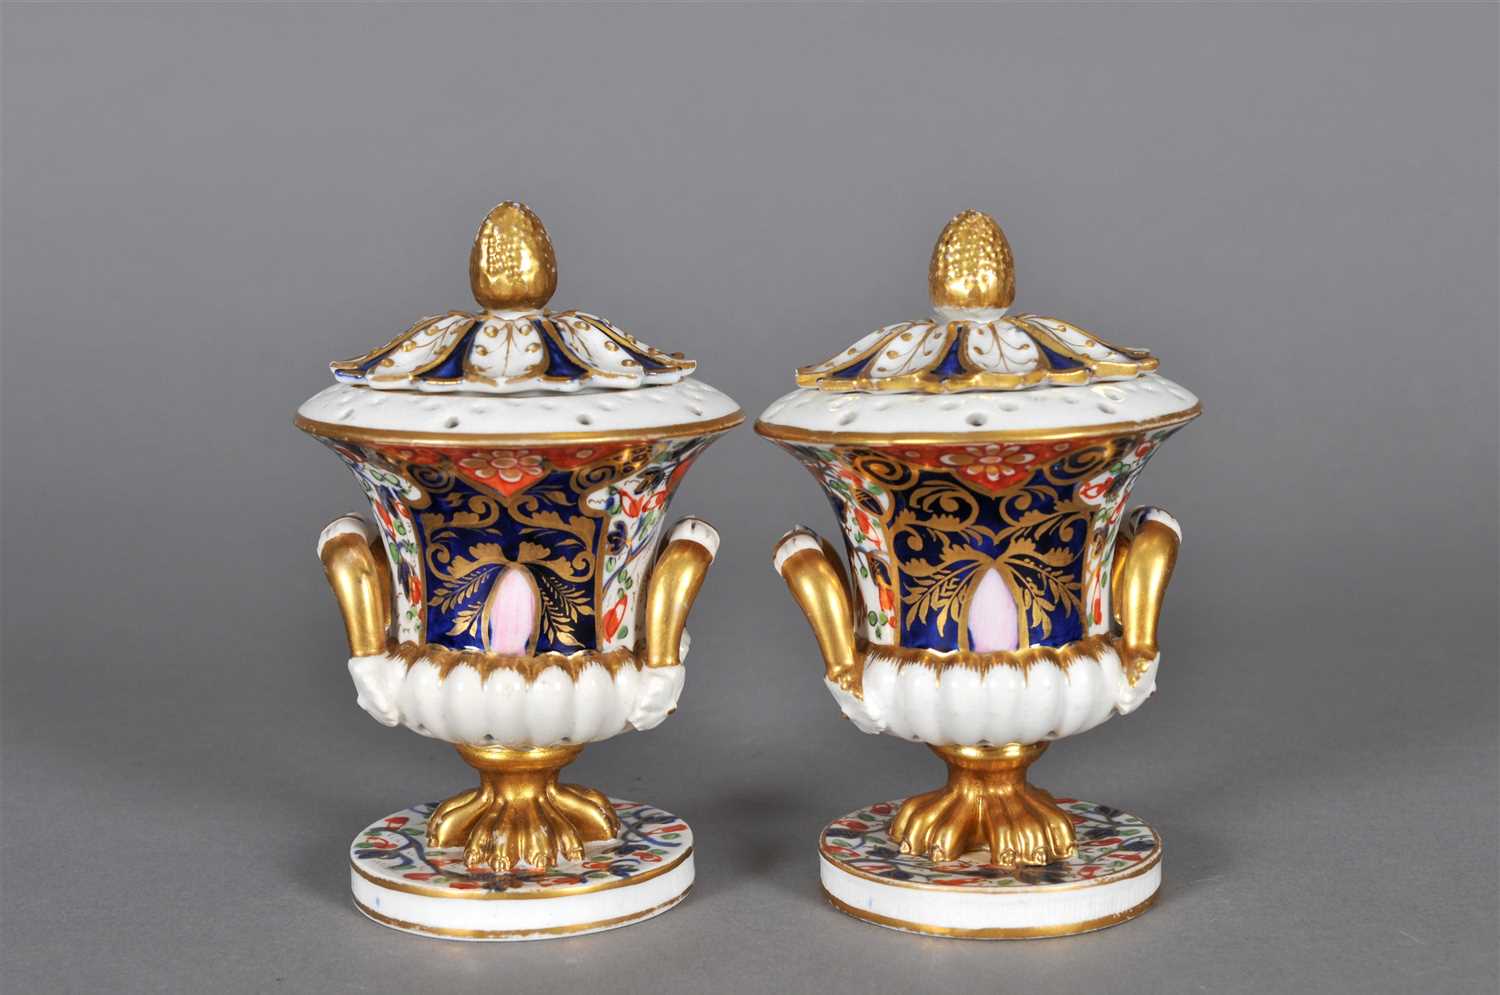 Lot 133 - A pair of Derby pot pourri vases and covers